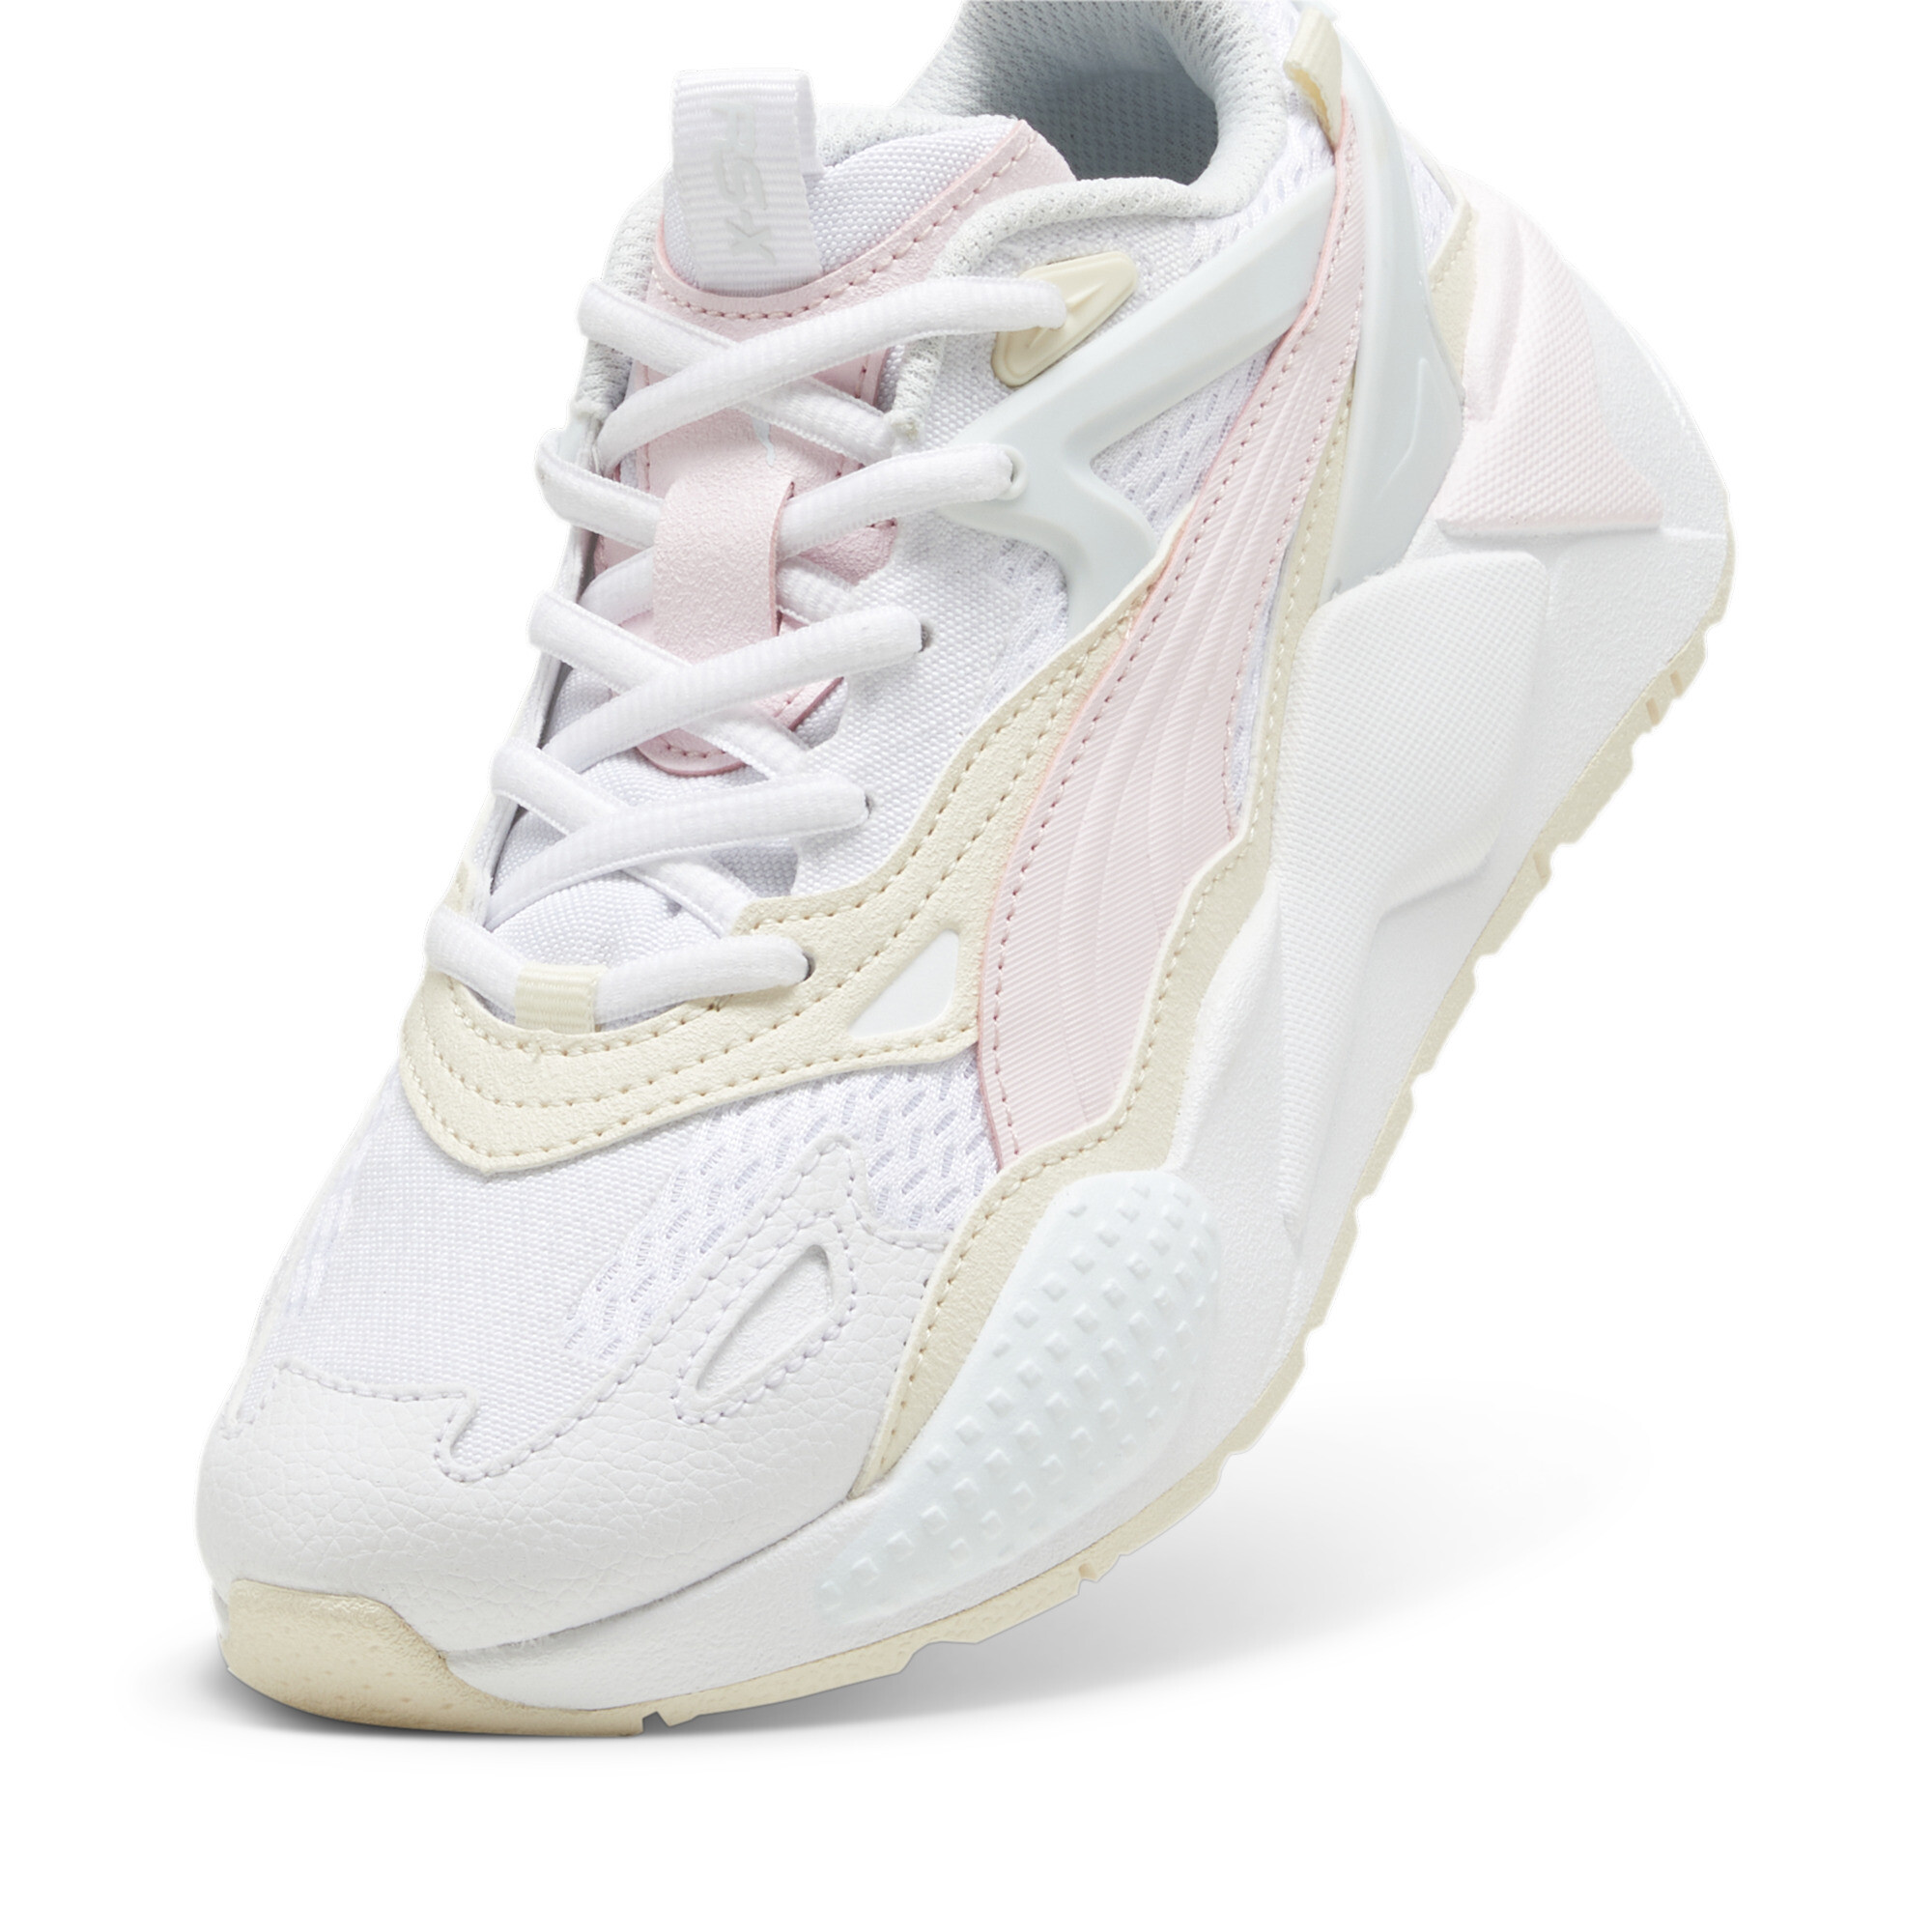 Puma RS-X Efekt Youth Sneakers, White, Size 38.5, Shoes